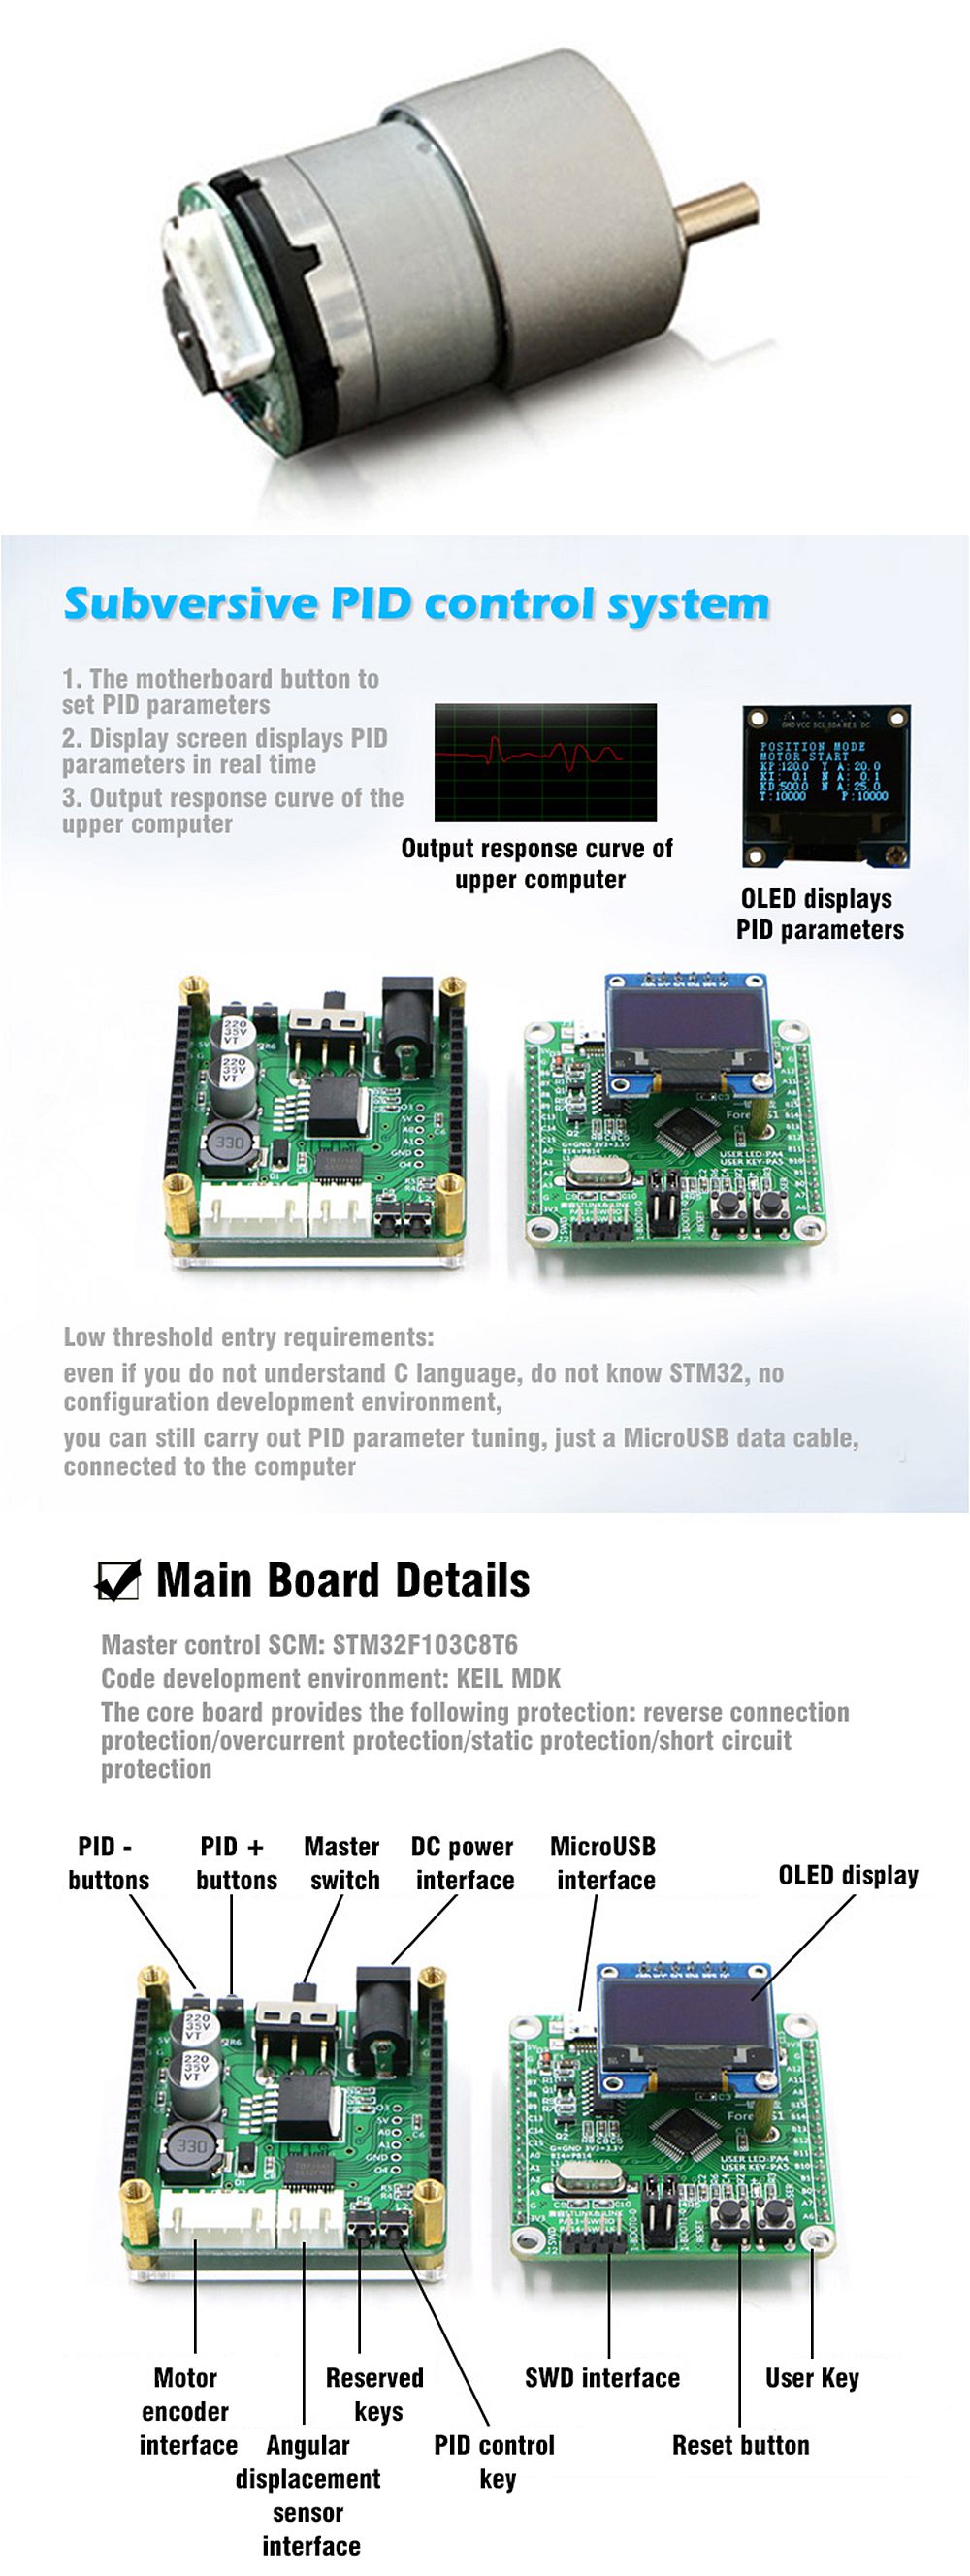 DC-Motor-PID-Learning-Kit-Encoder-Position-Control-Speed-Control-PID-Development-Board-1690187